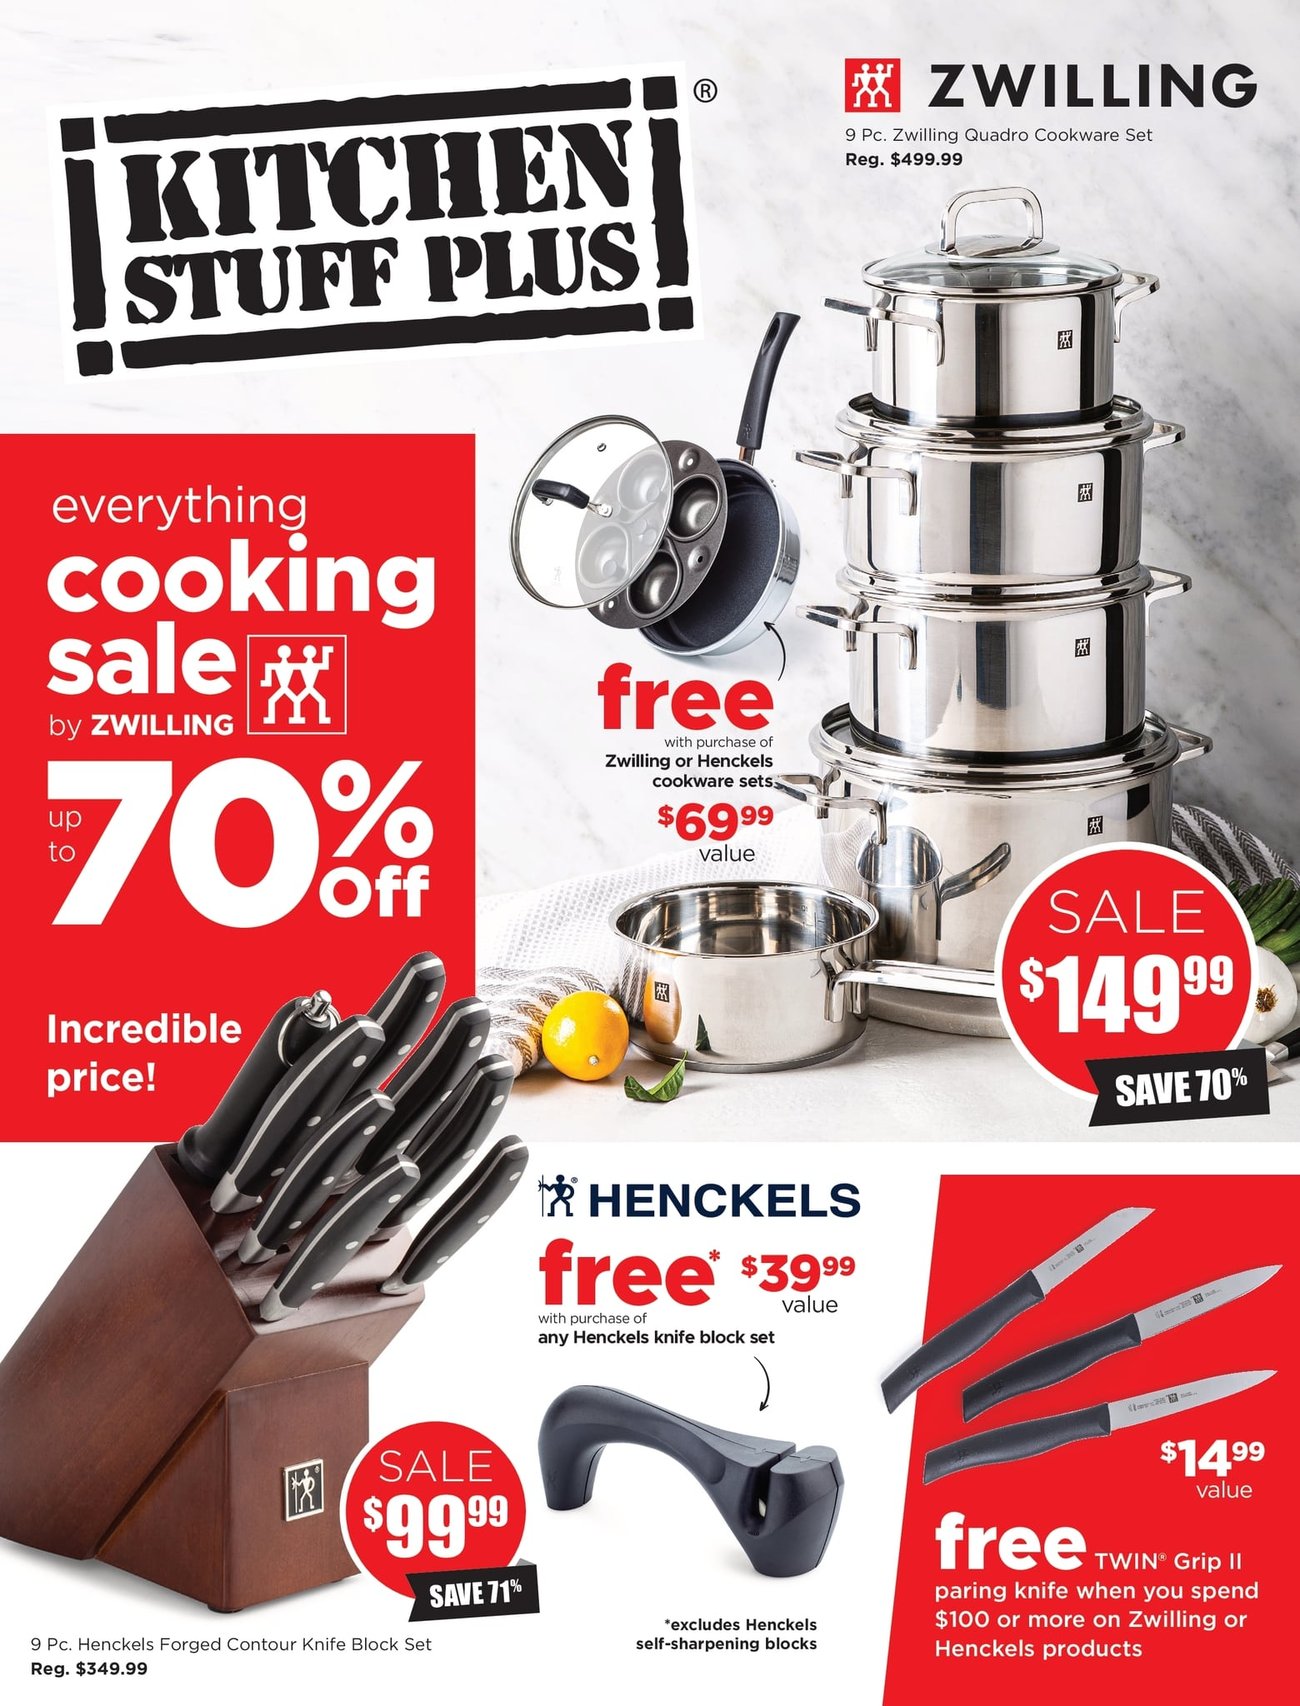 Kitchen Stuff Plus - Everything Cooking Sale - Page 1